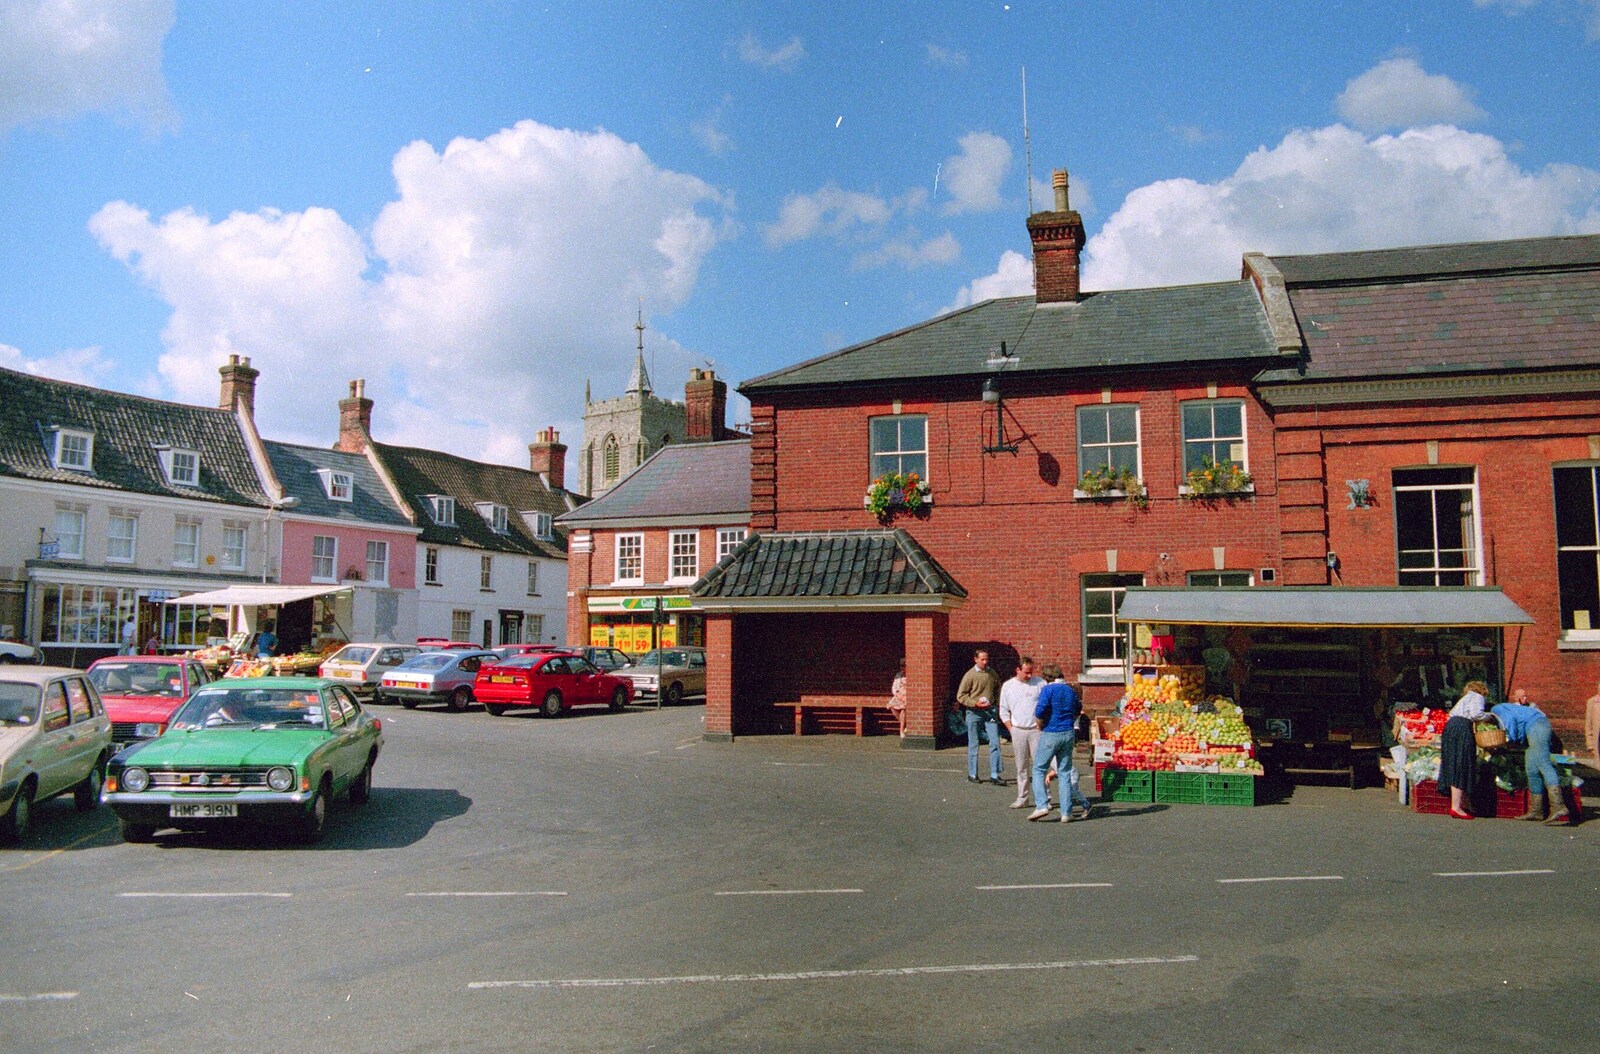 The market square in Aylsham from Soman-Wherry and a Drumkit, Norwich and Red House, Norfolk - 22nd July 1988